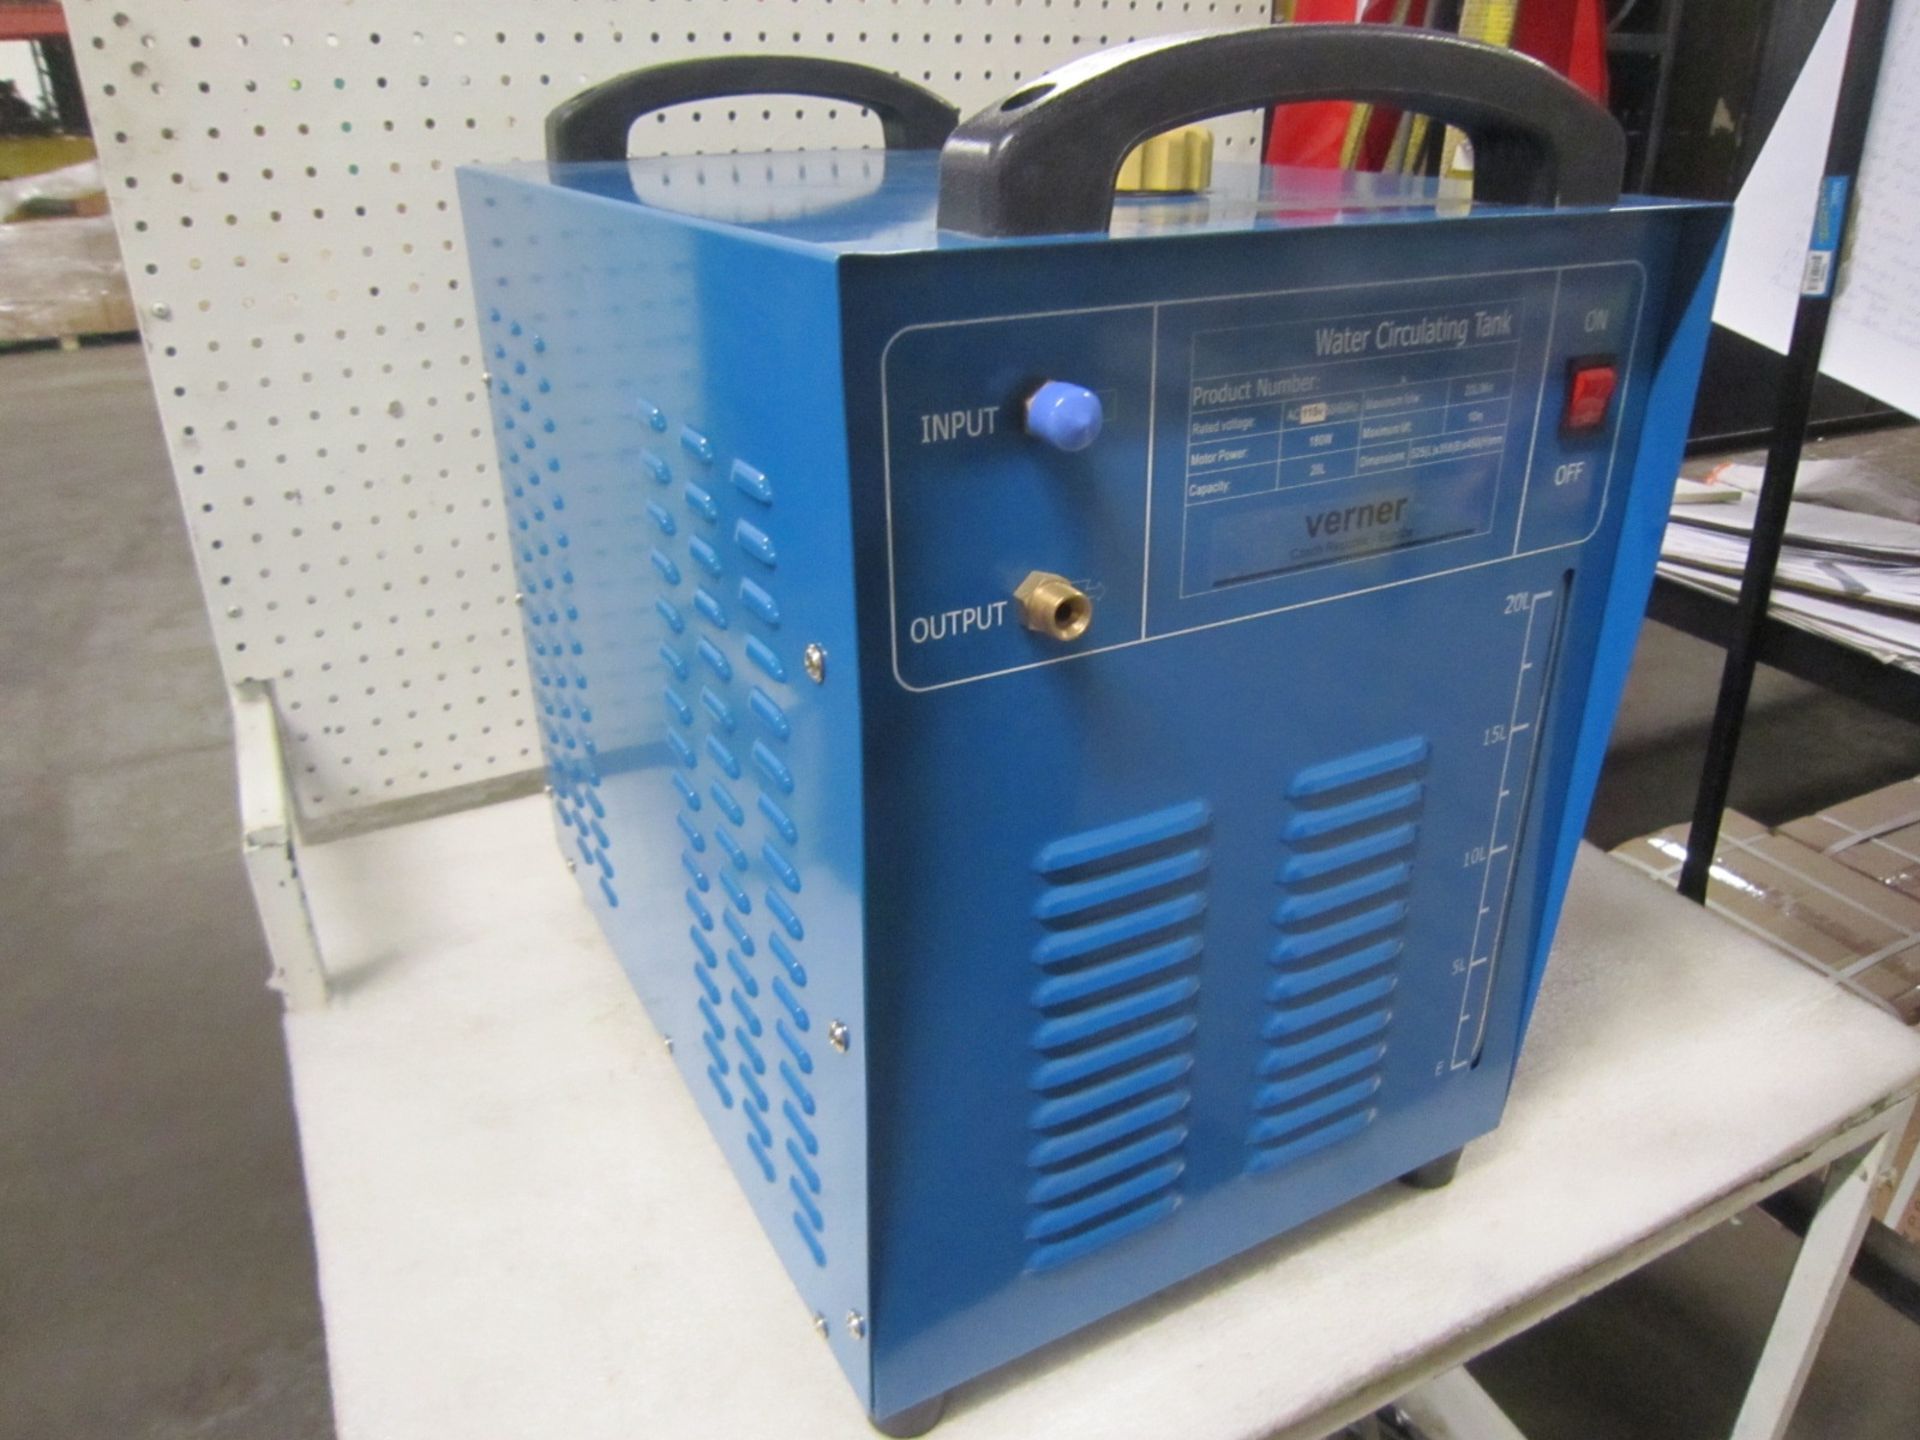 Verner Water Circulating Tig Welding Water Cooler - 20 Litre Capacity Brand new - 115V Single Phase - Image 2 of 2